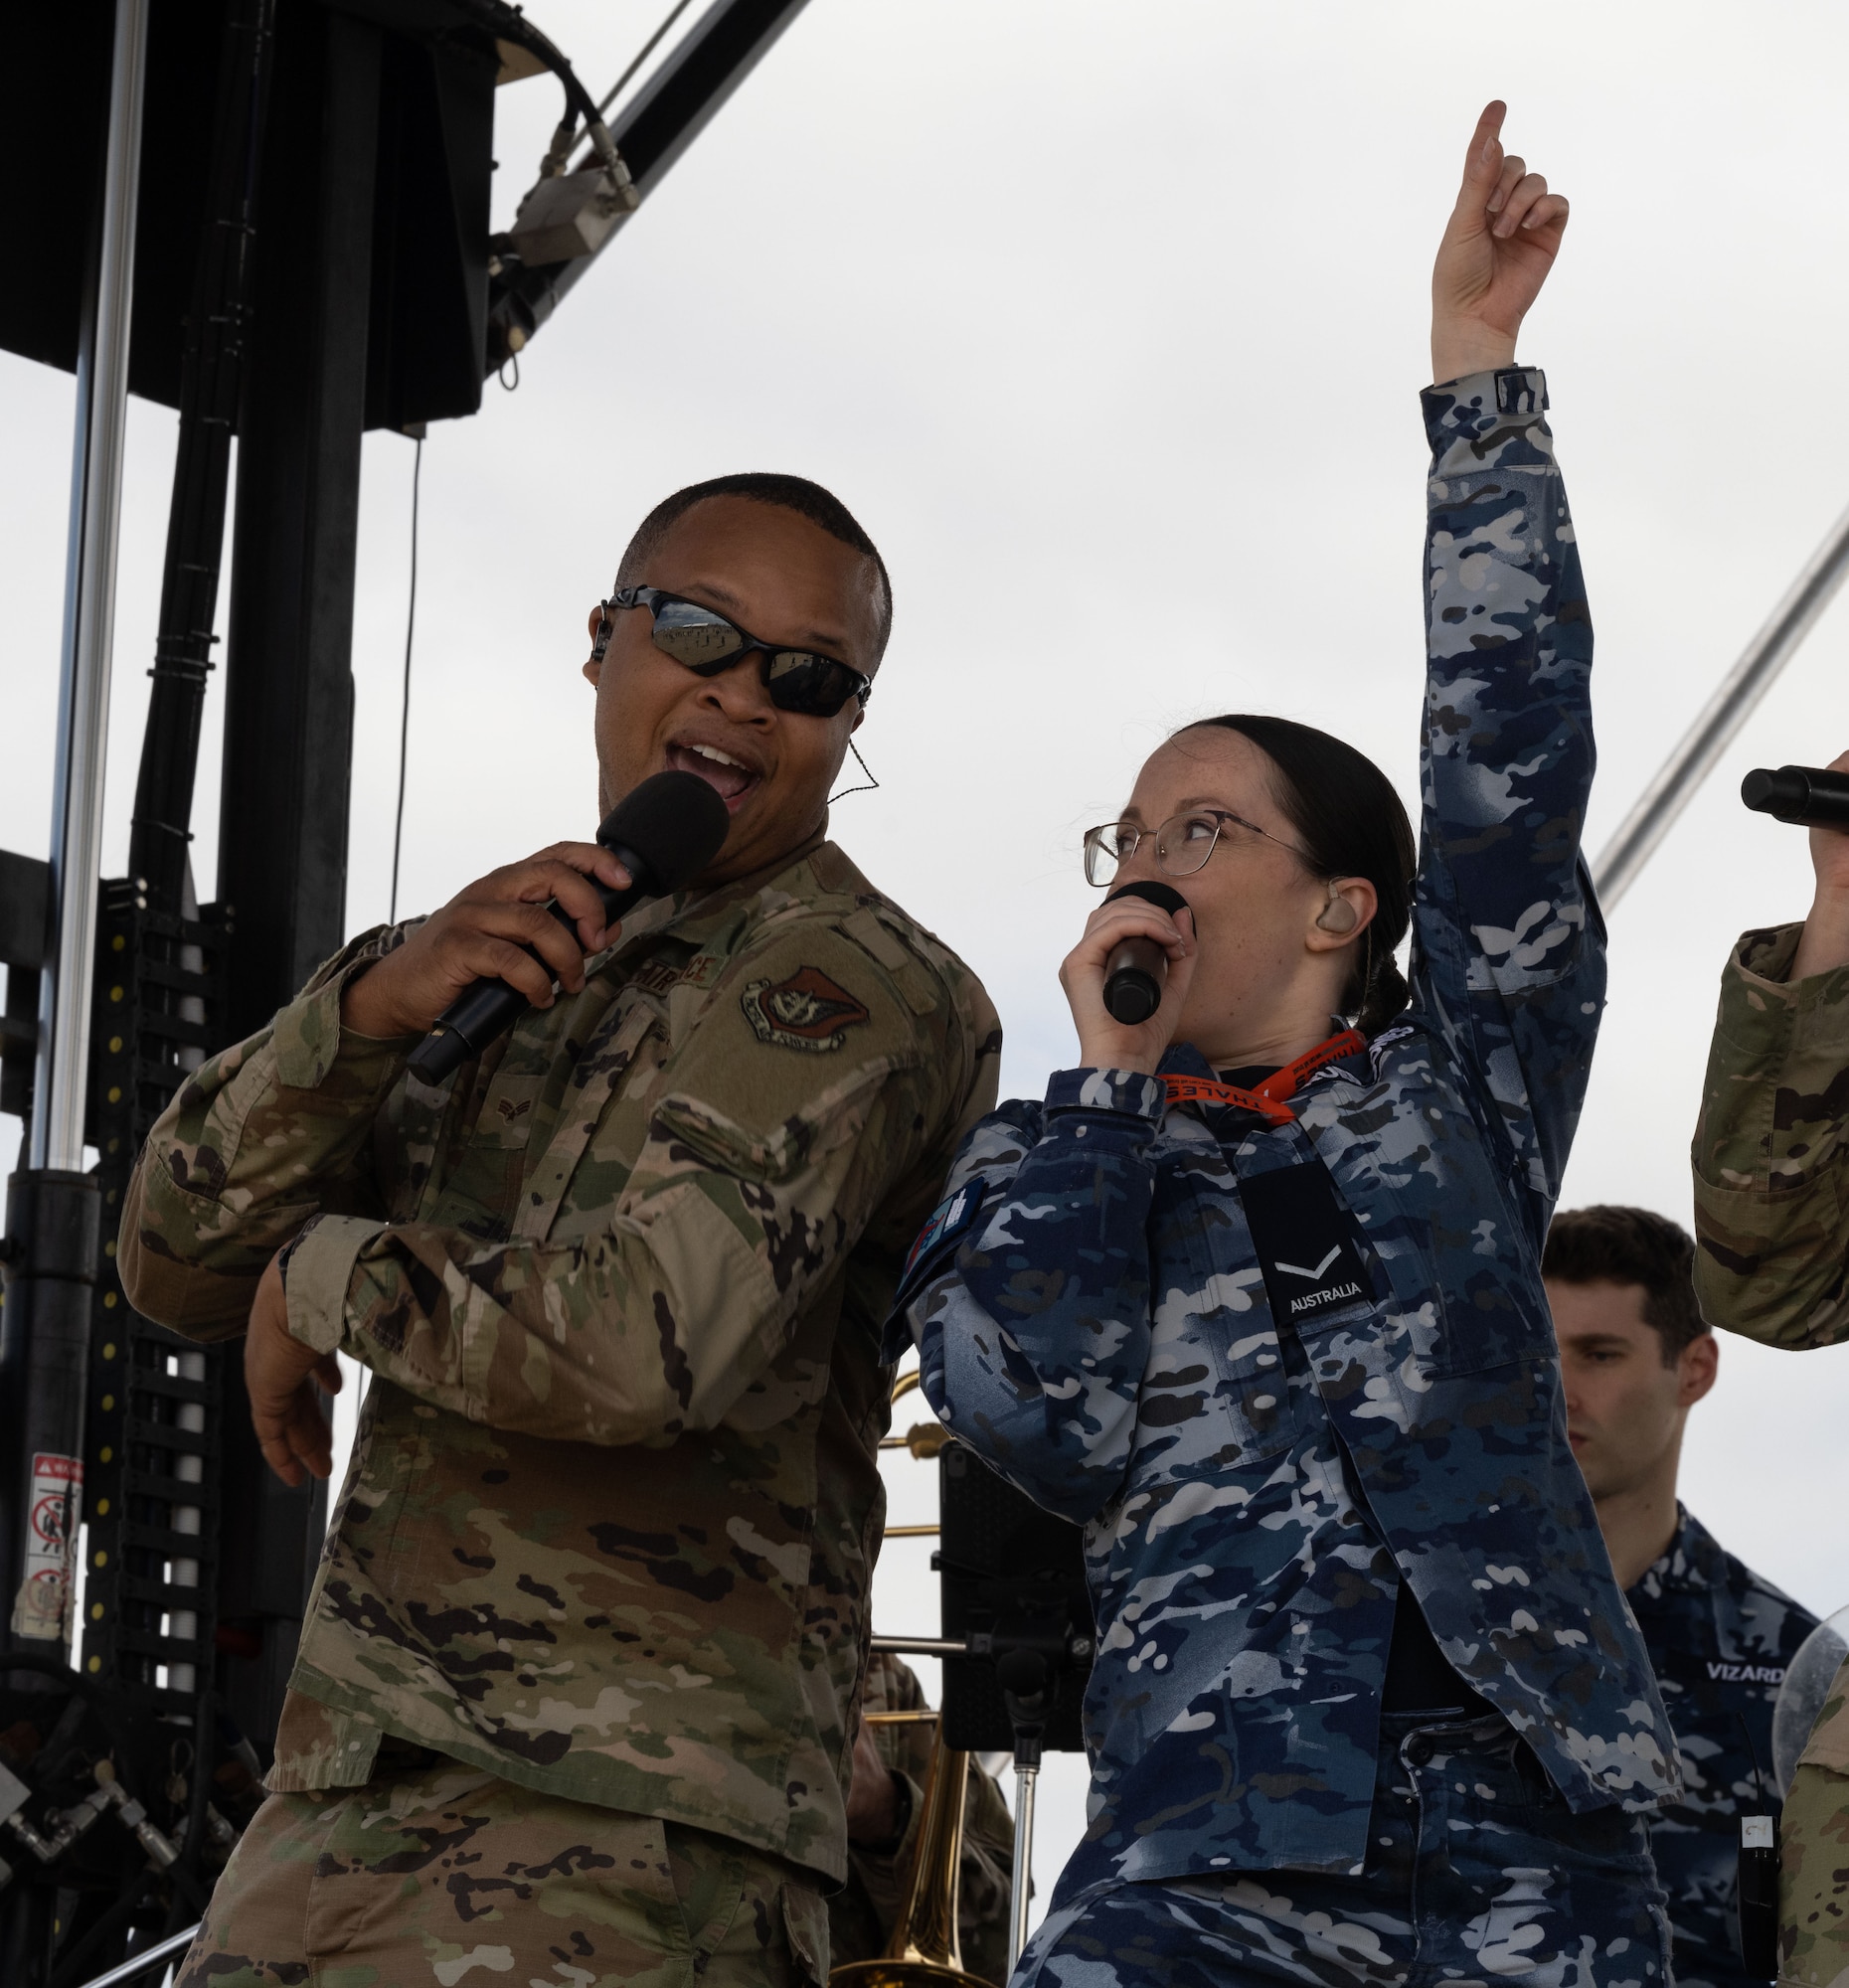 An Airman from the U.S. Air Force Band of the Pacific-Hawaii performs alongside a member of the Royal Australian Air Force band during the 2023 Australian International Airshow and Aerospace & Defence Exposition—AVALON 23—at Avalon International Airport, March 2, 2023. Our steadfast relationship with Australia, deeply rooted in our common principles and shared values, stems from working together day in and day out across the full spectrum of operations and will continue to prosper as we further integrate our efforts through events such as AVALON 23. Through the power and energy of music, the Band of the Pacific’s impressive performances create engaging moments that serve as a demonstration of the excellence displayed by the 46,000 Airmen serving, stationed and deployed throughout the Indo-Pacific. (U.S. Air Force photo by Tech. Sgt. Hailey Haux)